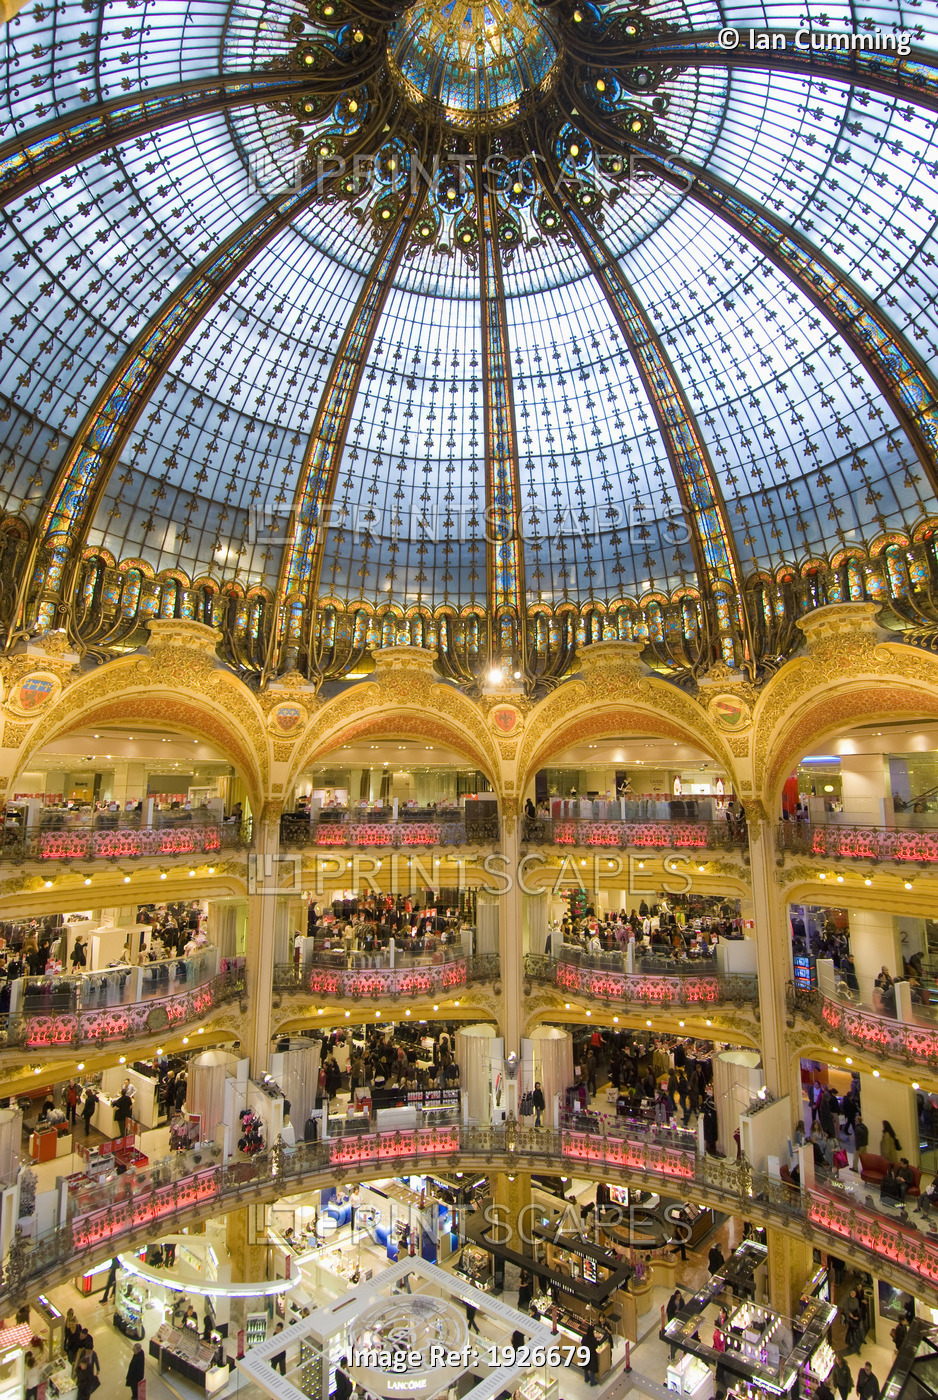 High View Of The Domed Central Area Of Galeries Lafayette, Looking Down On ...